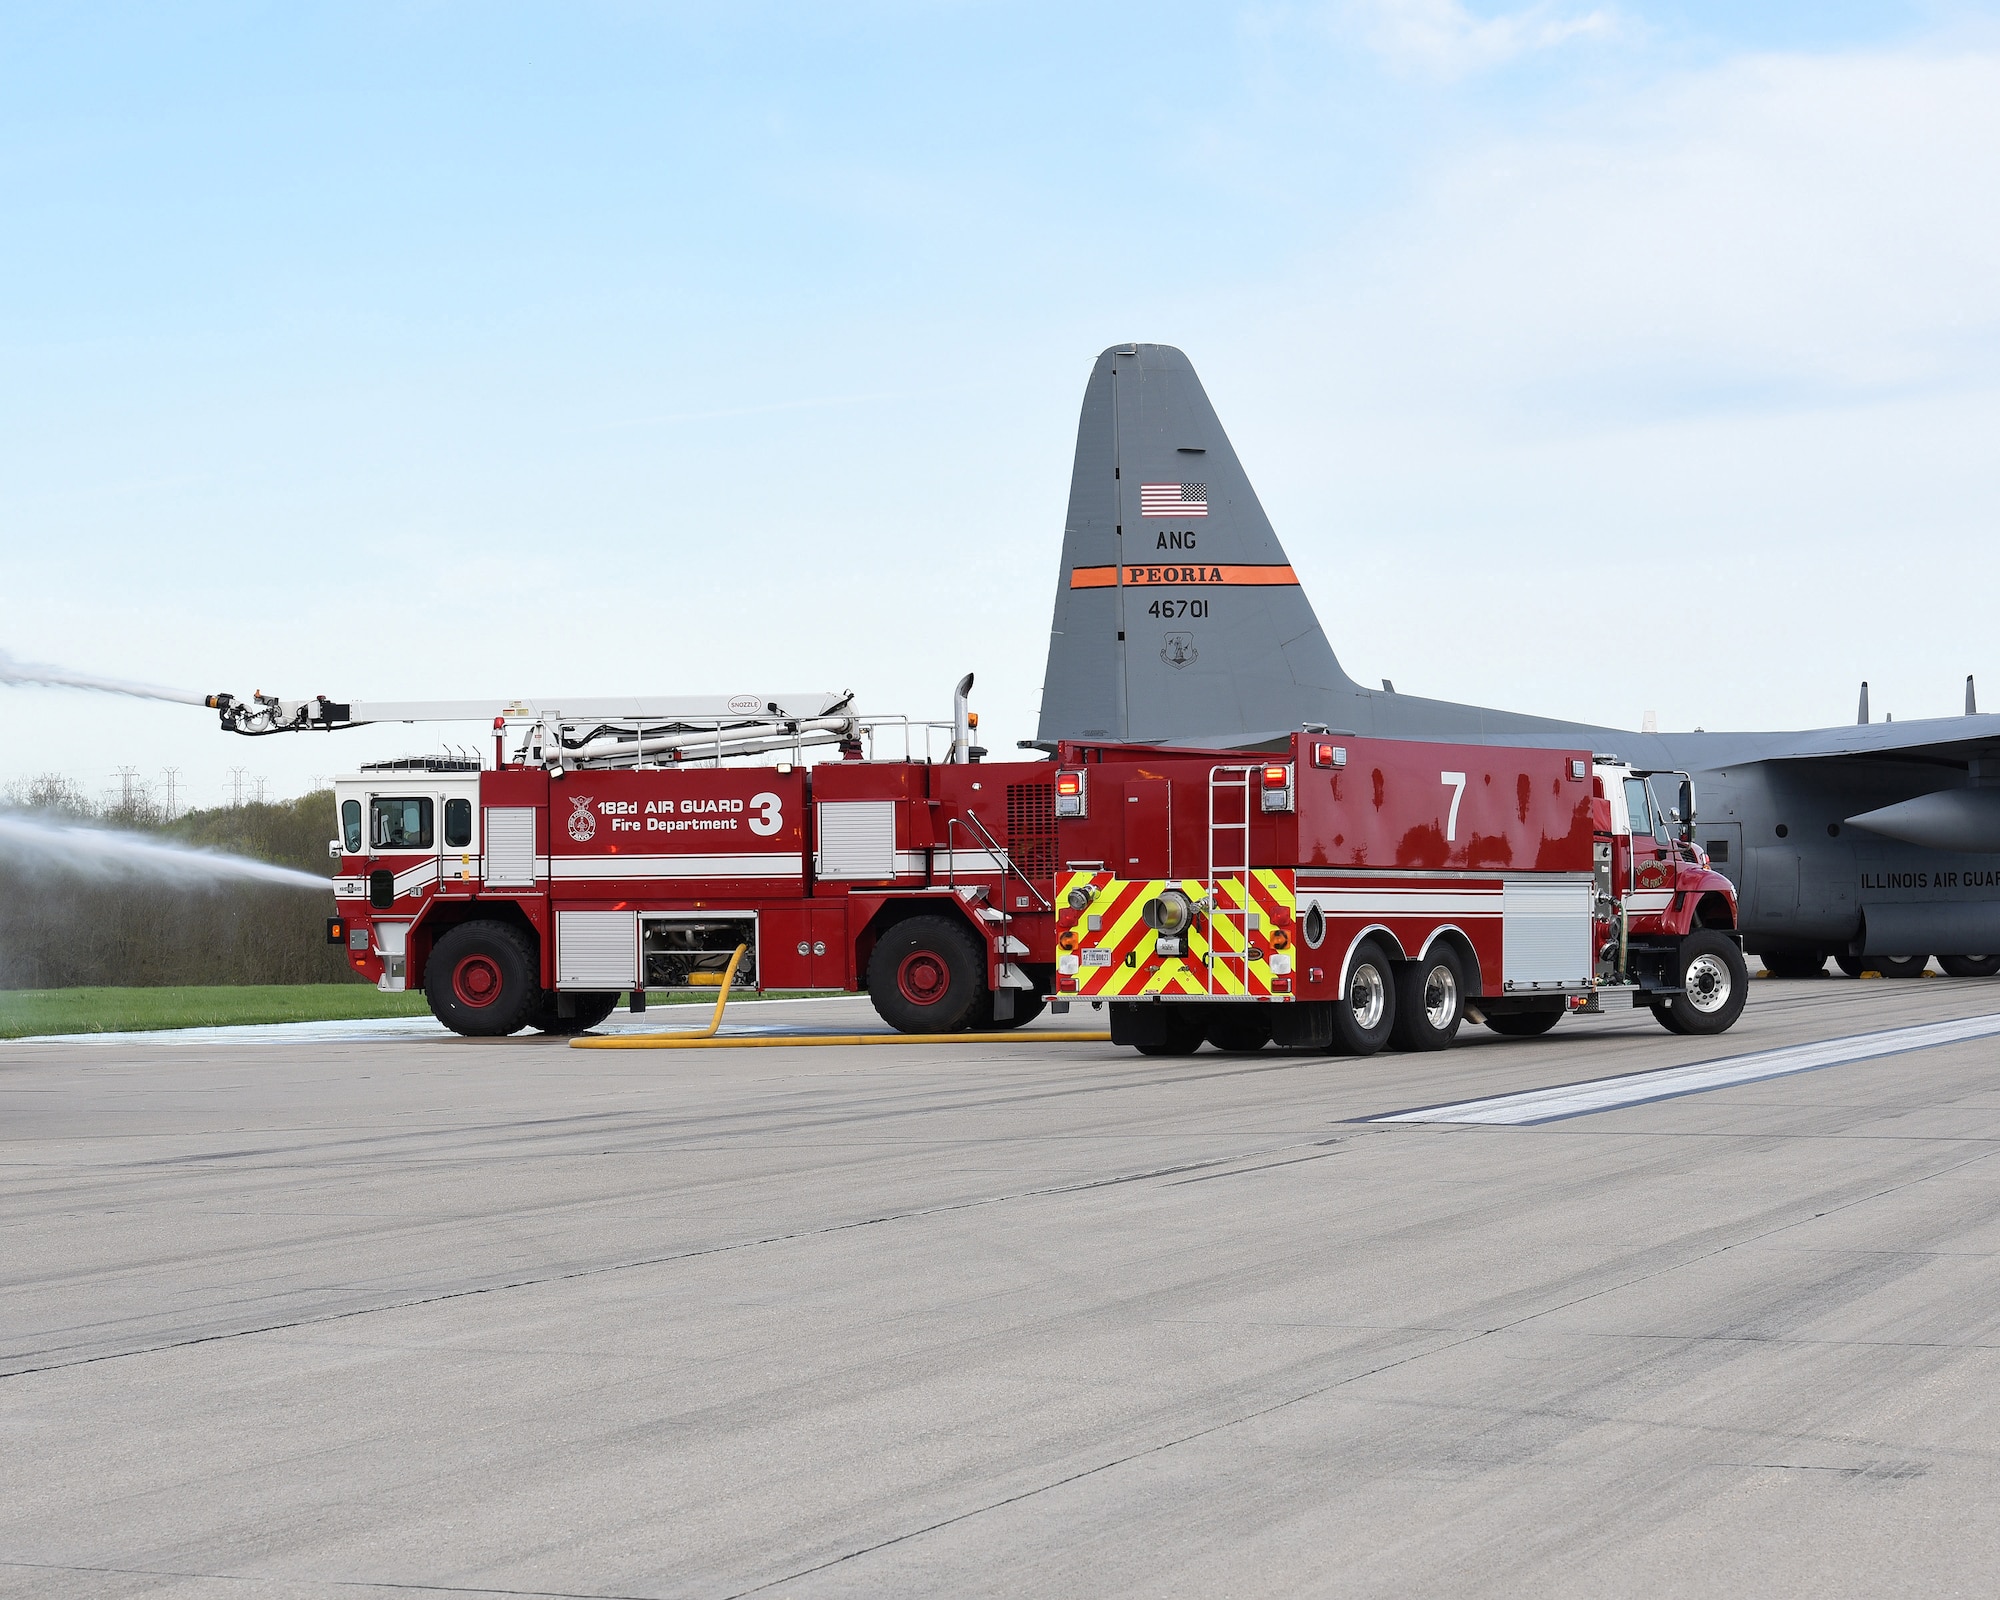 A water tender truck supplies water to an Oshkosh T1500 crash truck while simulating extinguishing a fire during an exercise at the General Wayne A. Downing Peoria International Airport in Peoria, Ill. April 22, 2017. Thirty-eight agencies and more than 200 exercise participants took part in the full-scale mass casualty exercise. (U.S. Air National Guard photo by Master Sgt. Todd Pendleton)